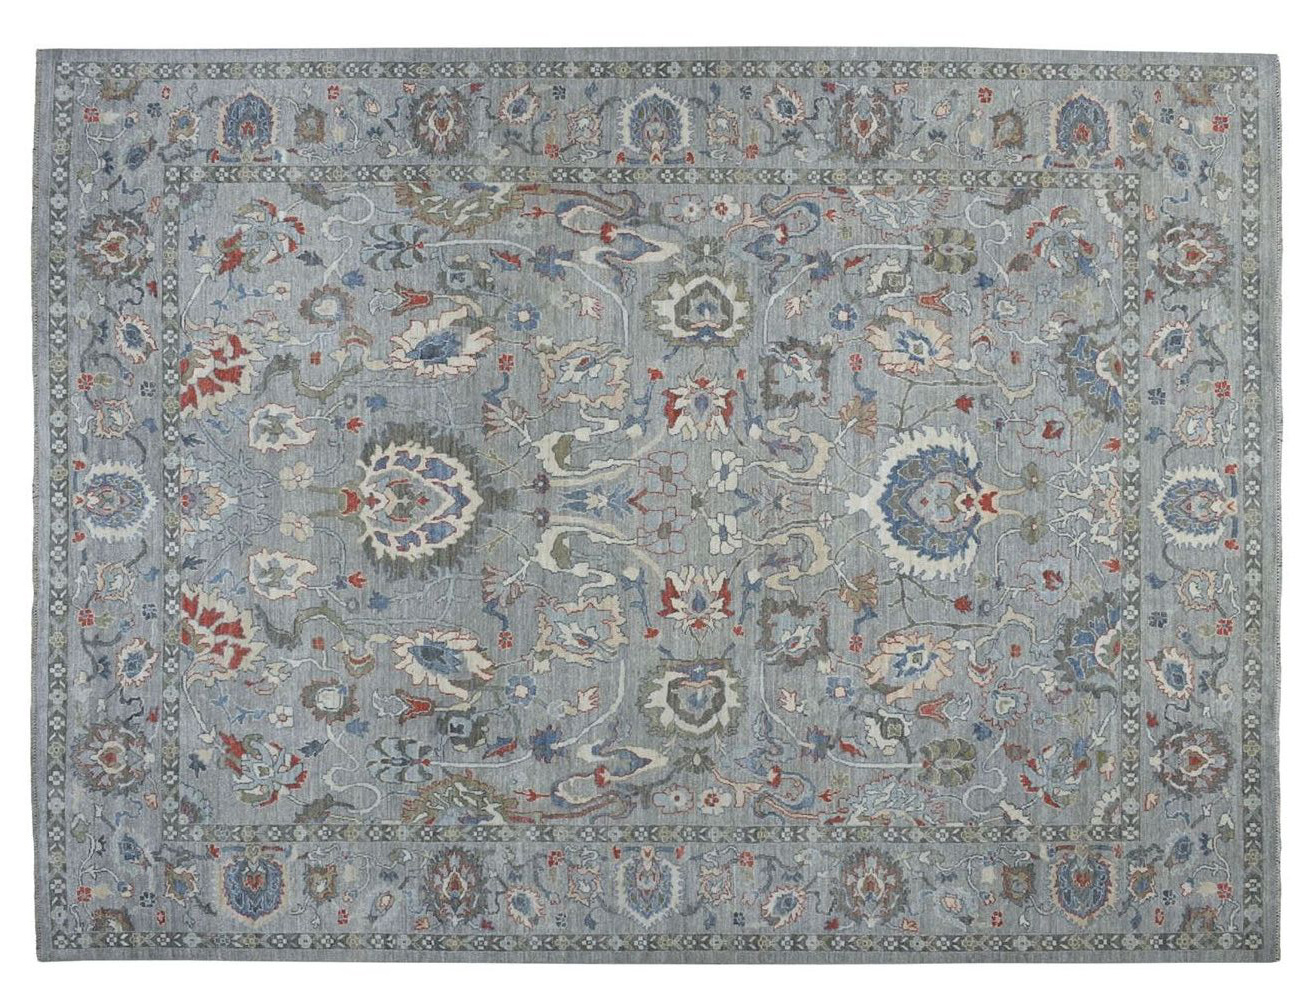 Rugs - 9x12 | The Kellogg Collection